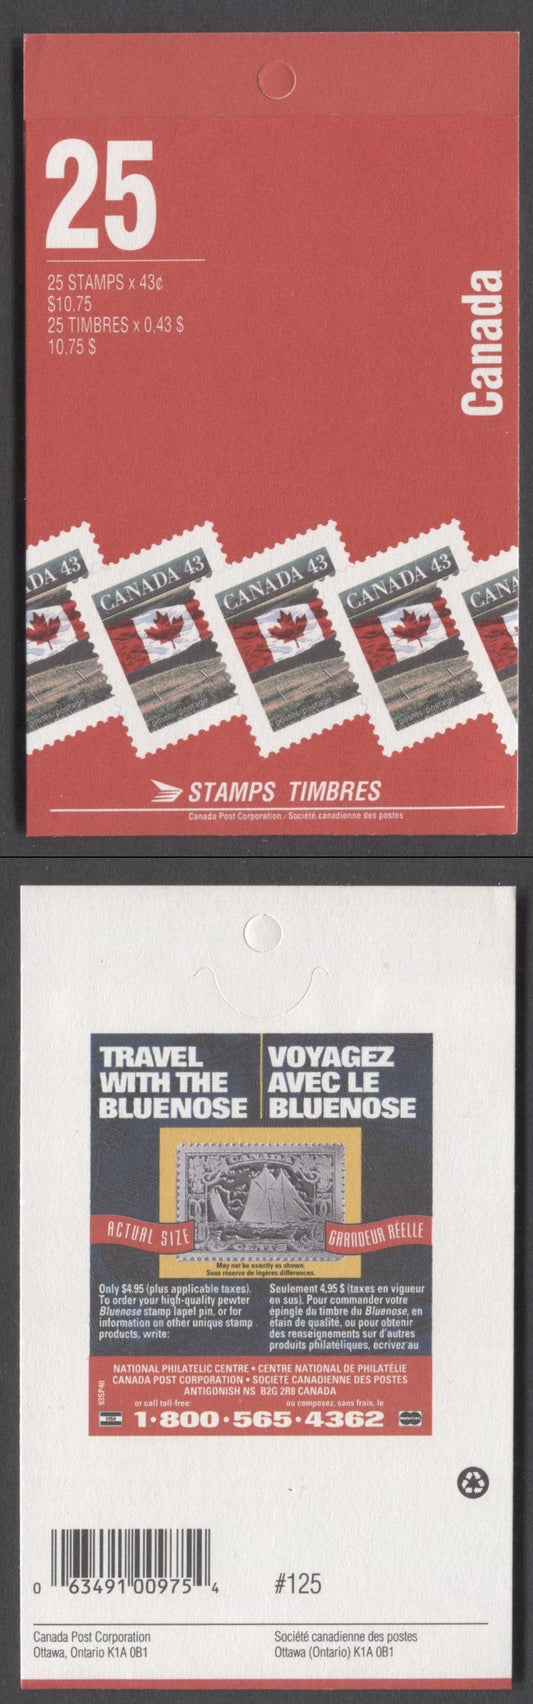 Lot 97 Canada BK154Ac 1992-1994 Definitive Issue, A 43c Multicolored Booklet, Sealed, HB Cover Cover Stock, 5 Stamps' & 'Bluenose' Covers, Leigh-Marden Printing, Perf 14.5 x 14.6, 49c & 86c Rates, Tag Bar Along Top Labels, Address in Titlecase